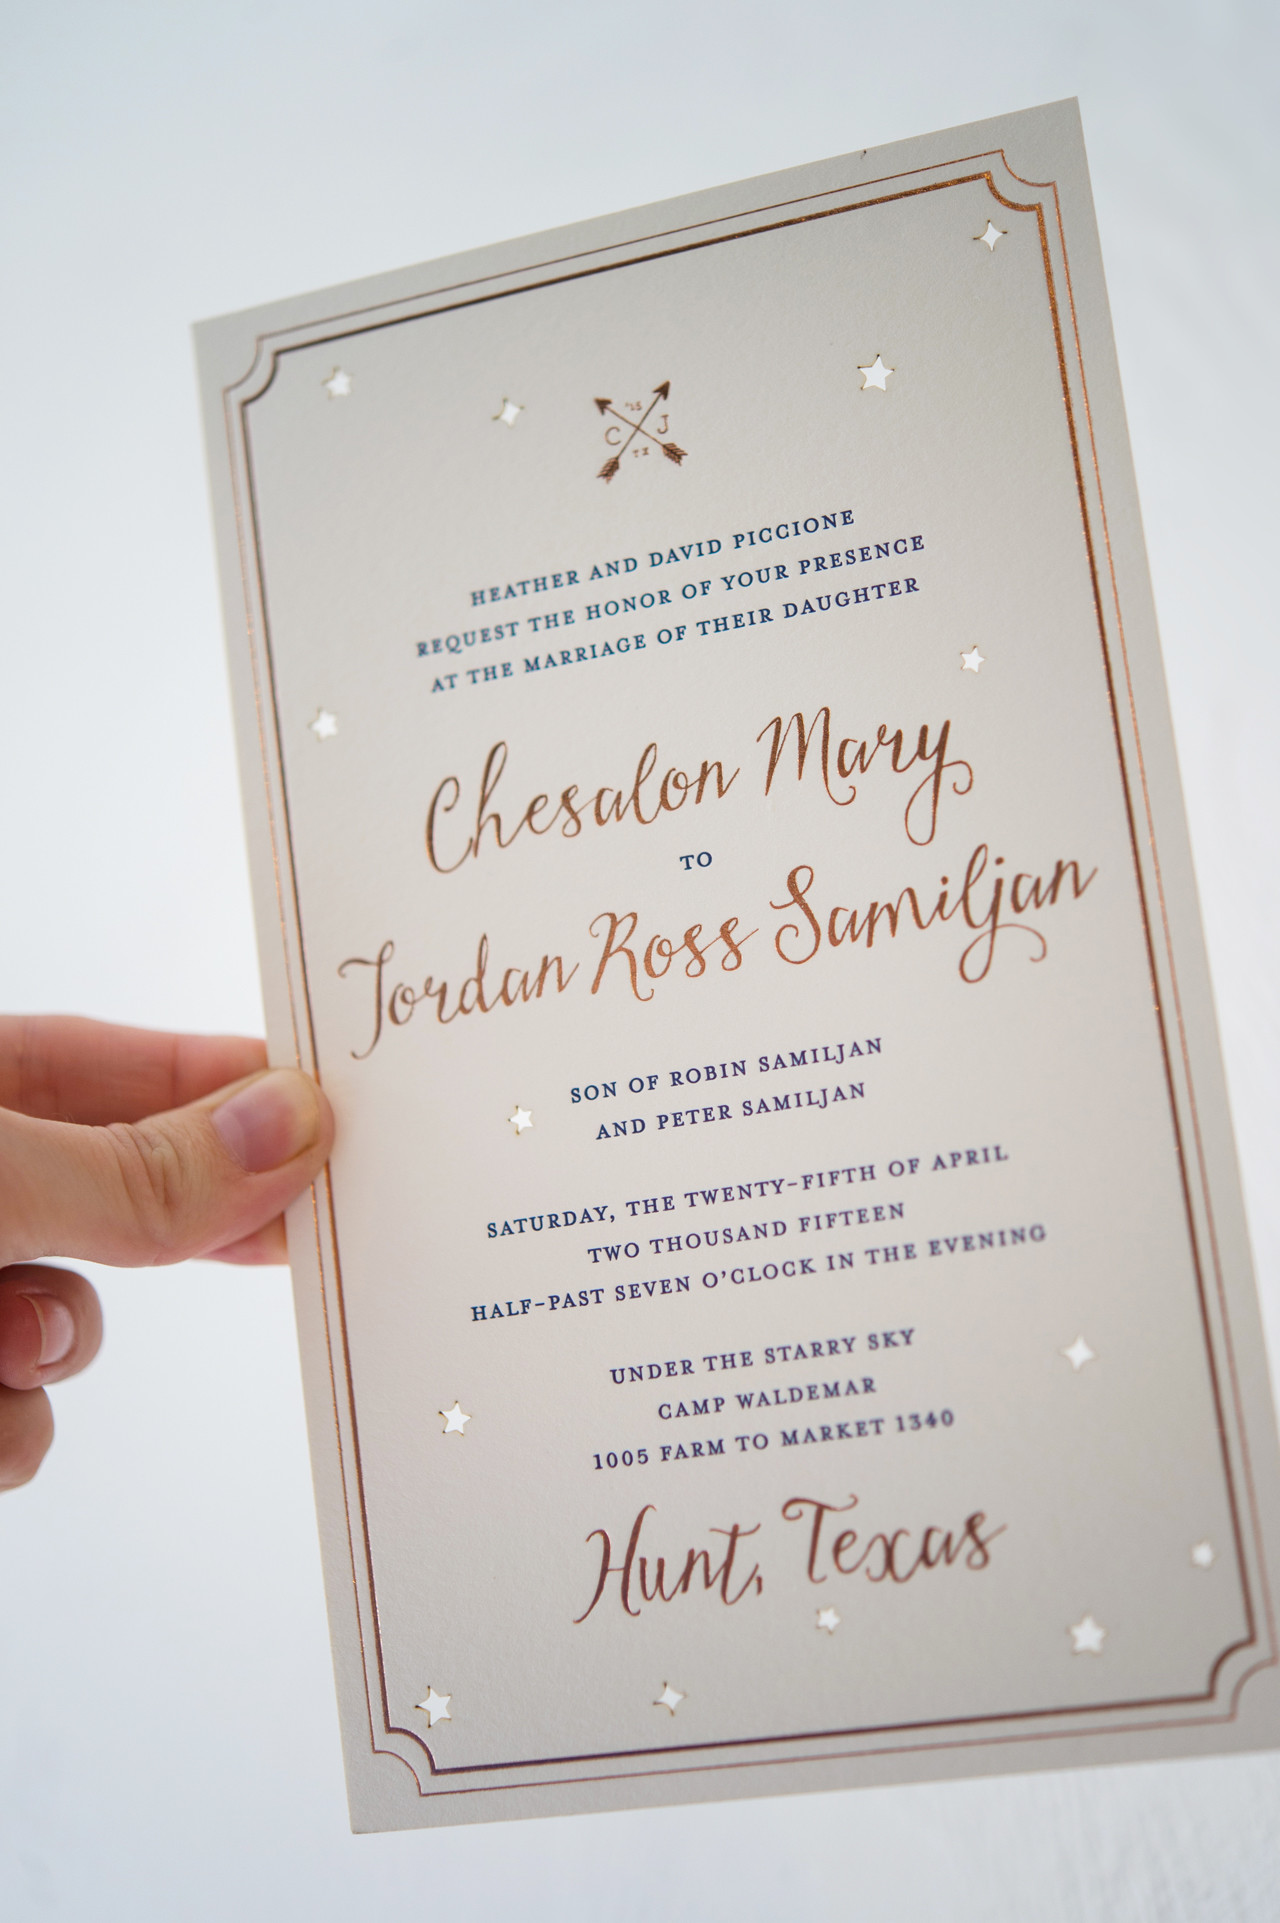 Rose Gold Foil Night Sky Wedding Invitations by Gus & Ruby Letterpress / Photo Credit: Brea McDonald Photography / Oh So Beautiful Paper